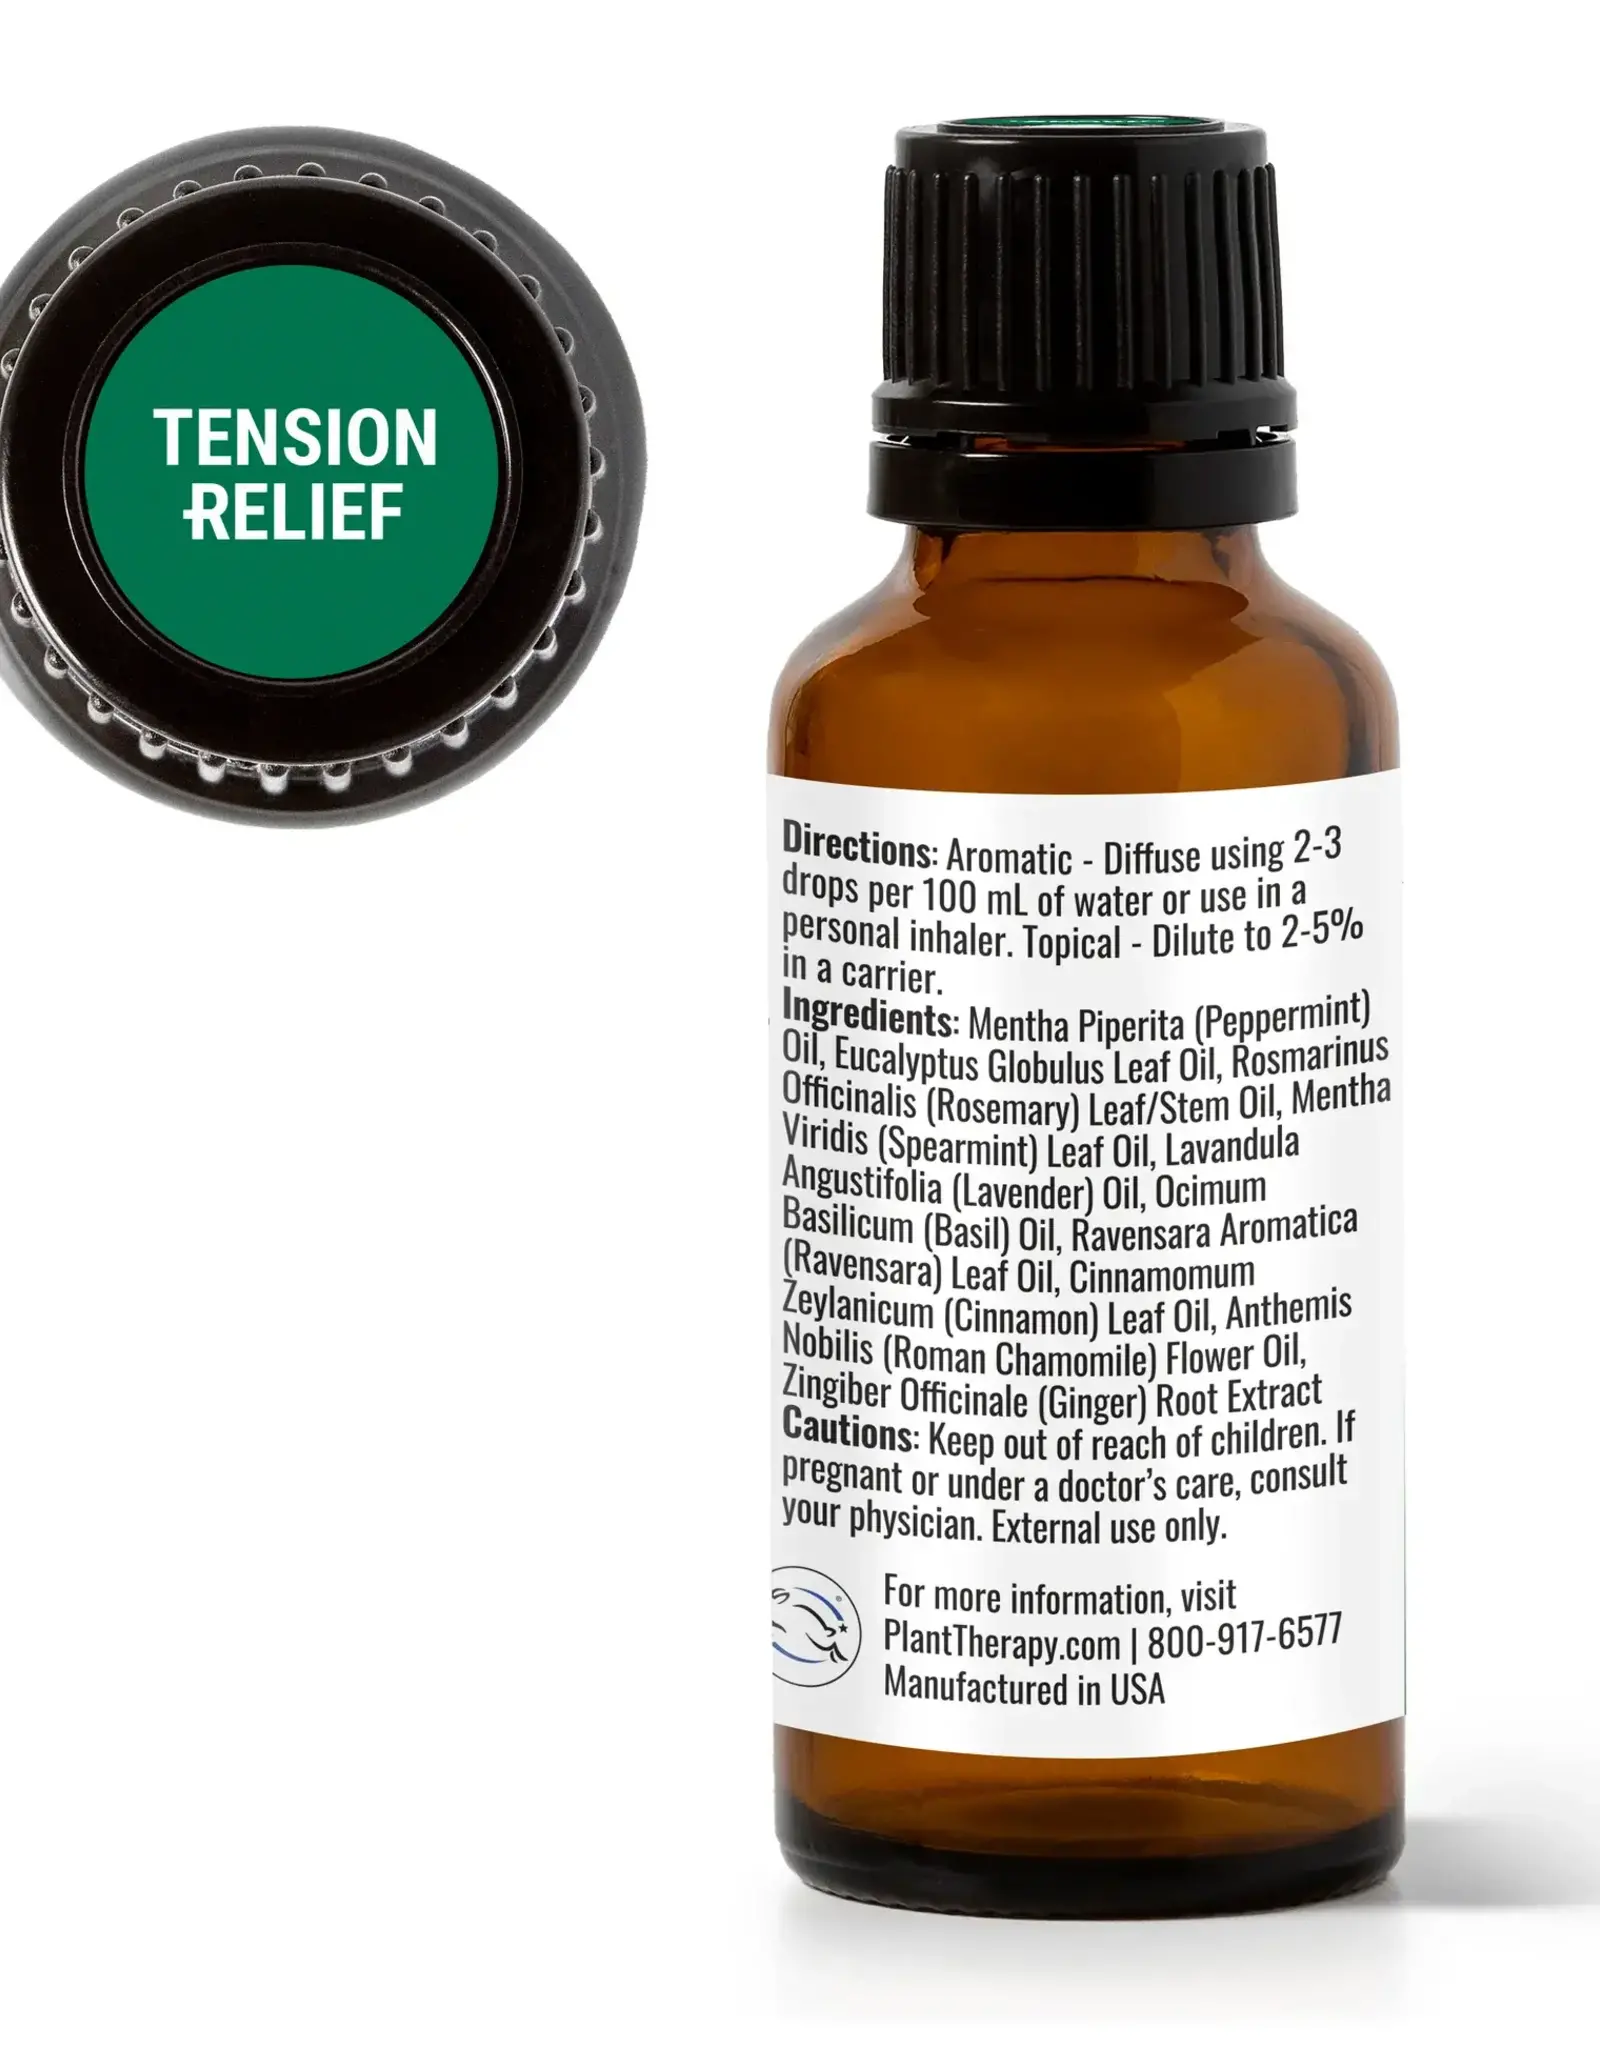 Plant Therapy Tension Relief Essential Oil Blend - 10ml